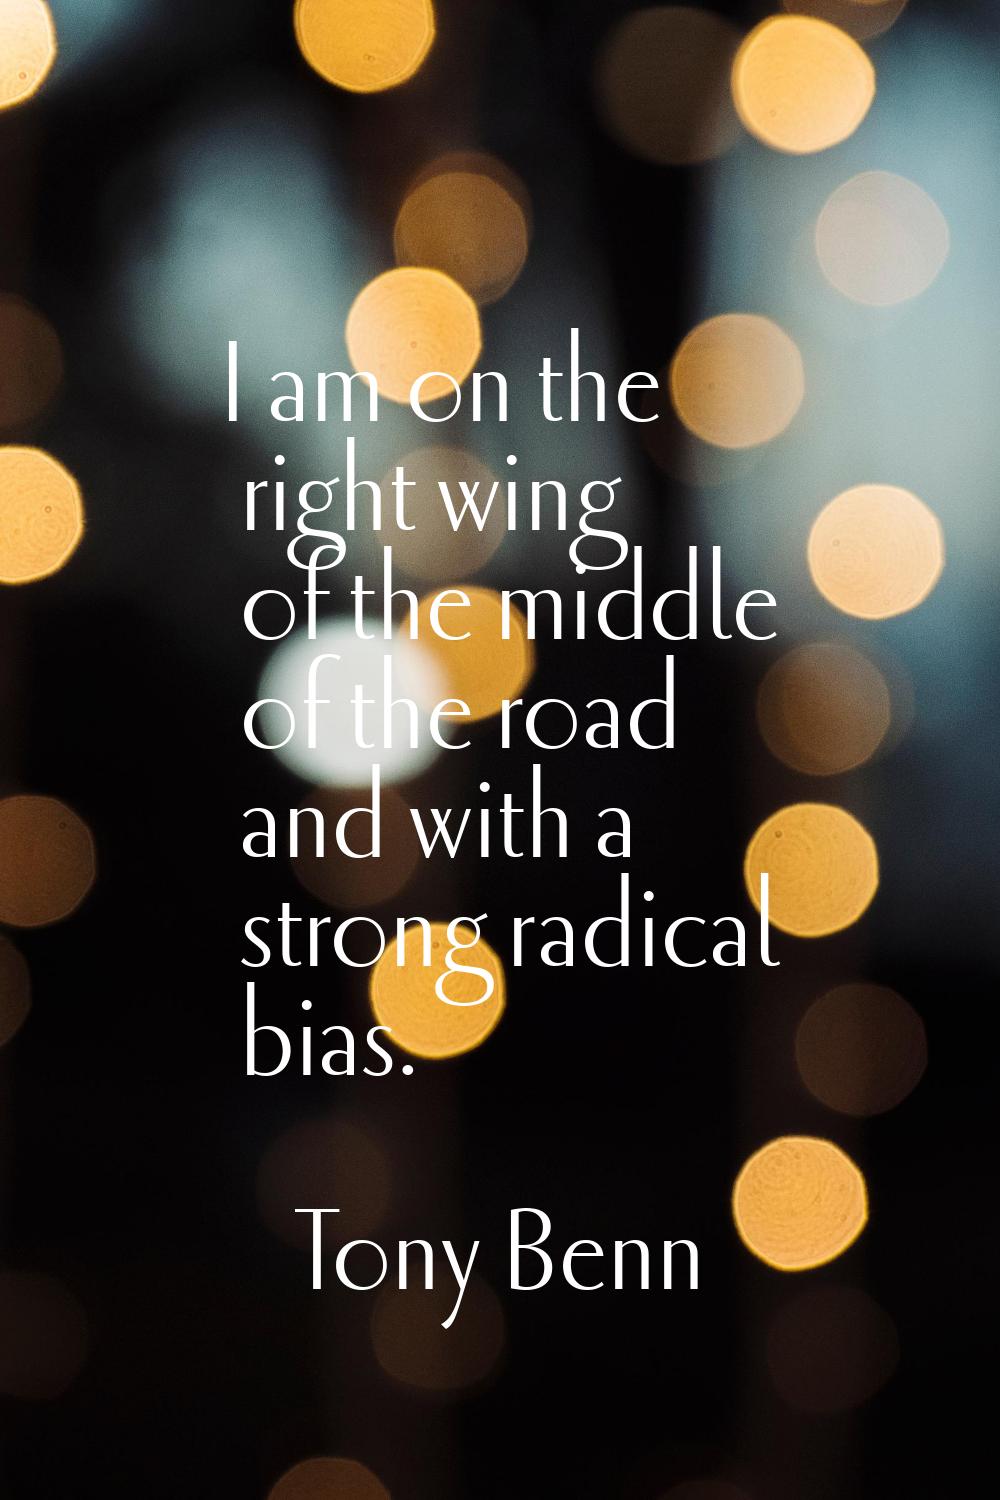 I am on the right wing of the middle of the road and with a strong radical bias.